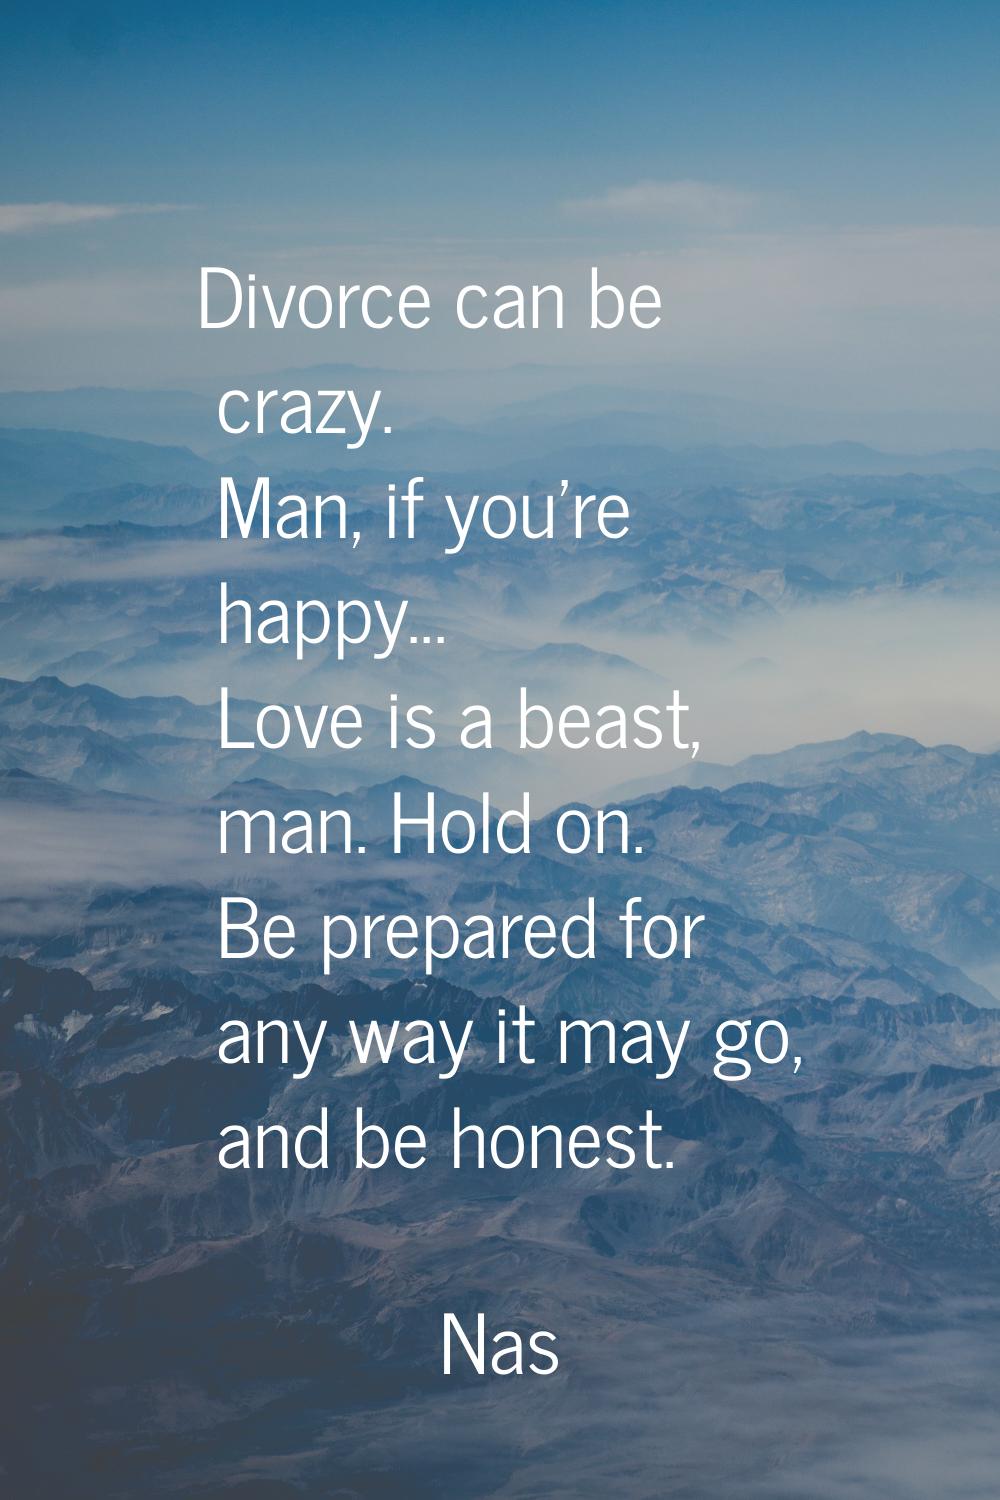 Divorce can be crazy. Man, if you're happy... Love is a beast, man. Hold on. Be prepared for any wa